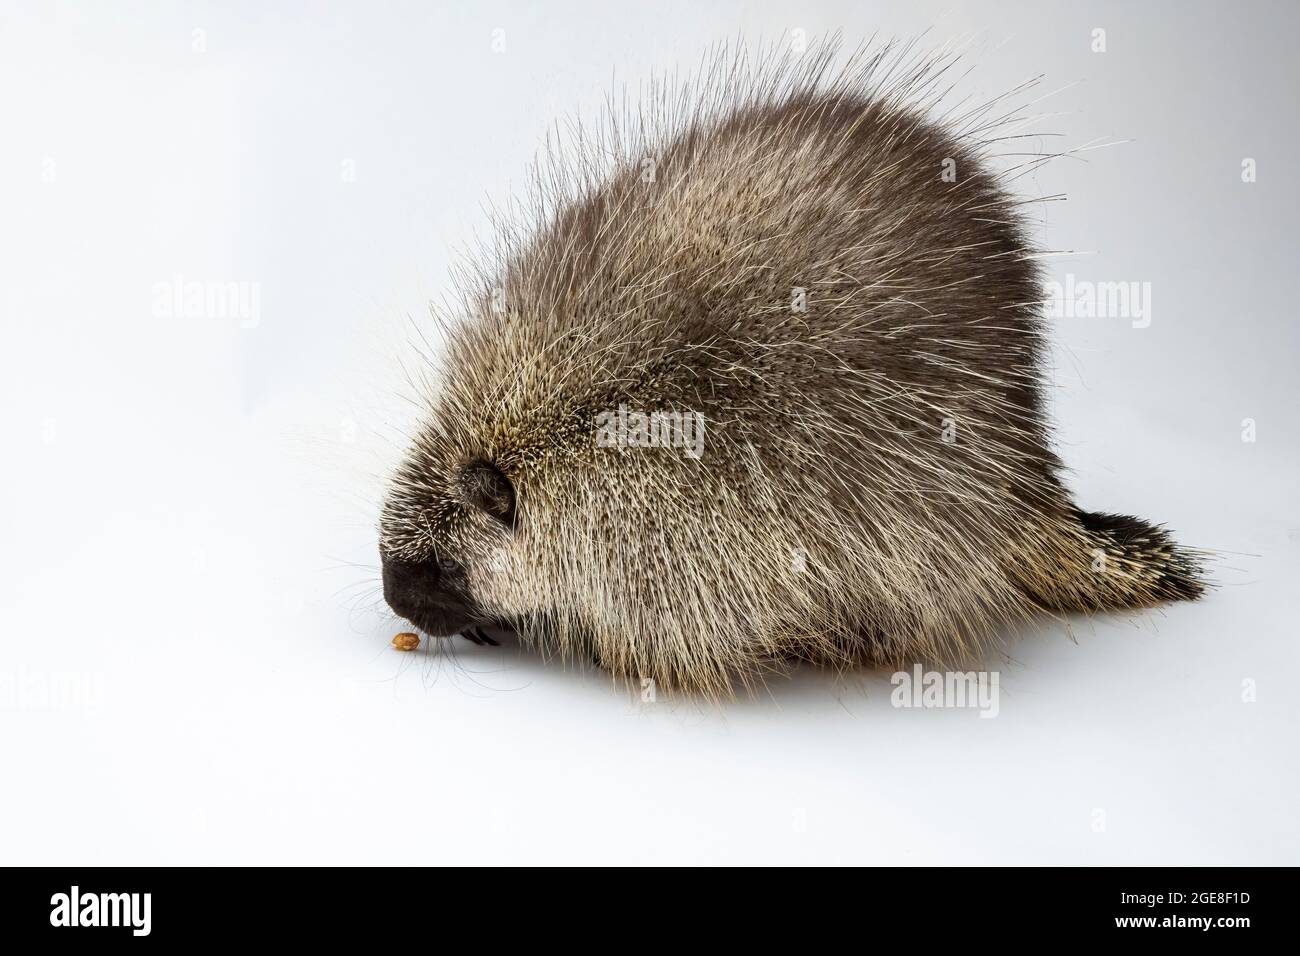 Porcupine on a White Background Isolated on a White Background Stock Photo